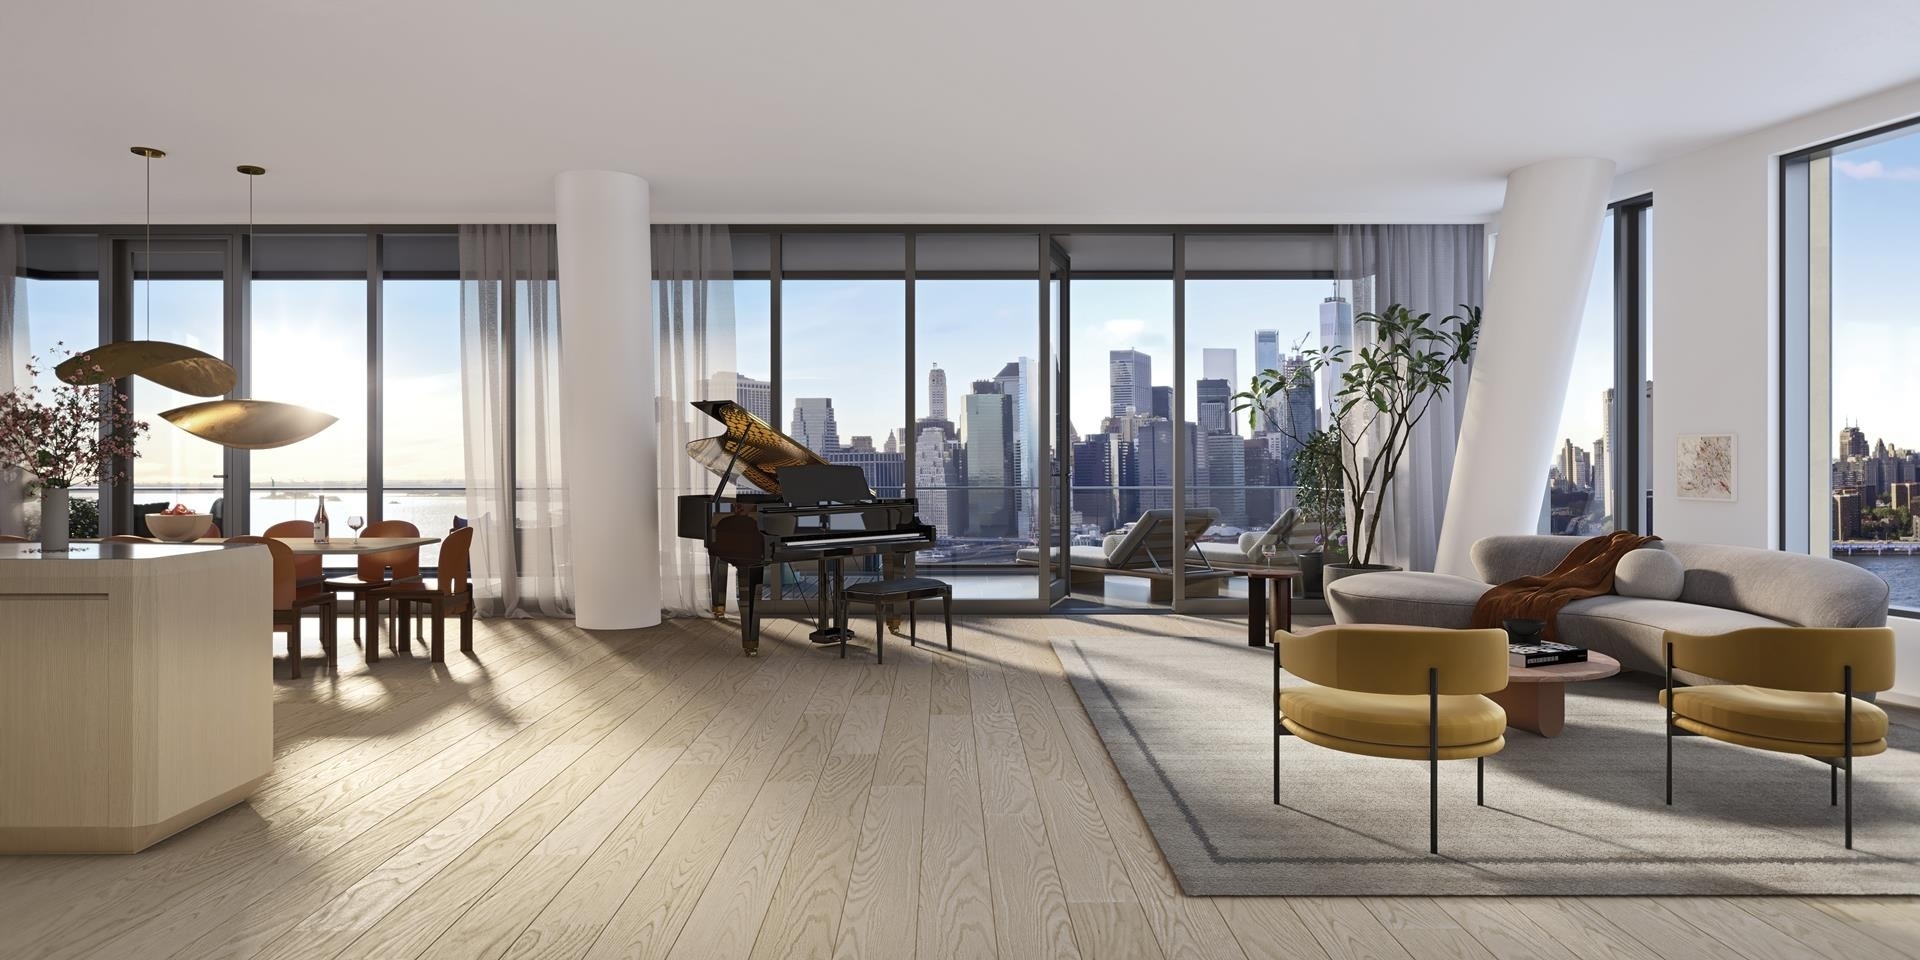 3. Condominiums for Sale at Olympia Dumbo, 30 FRONT ST, 12A Brooklyn, NY 11201